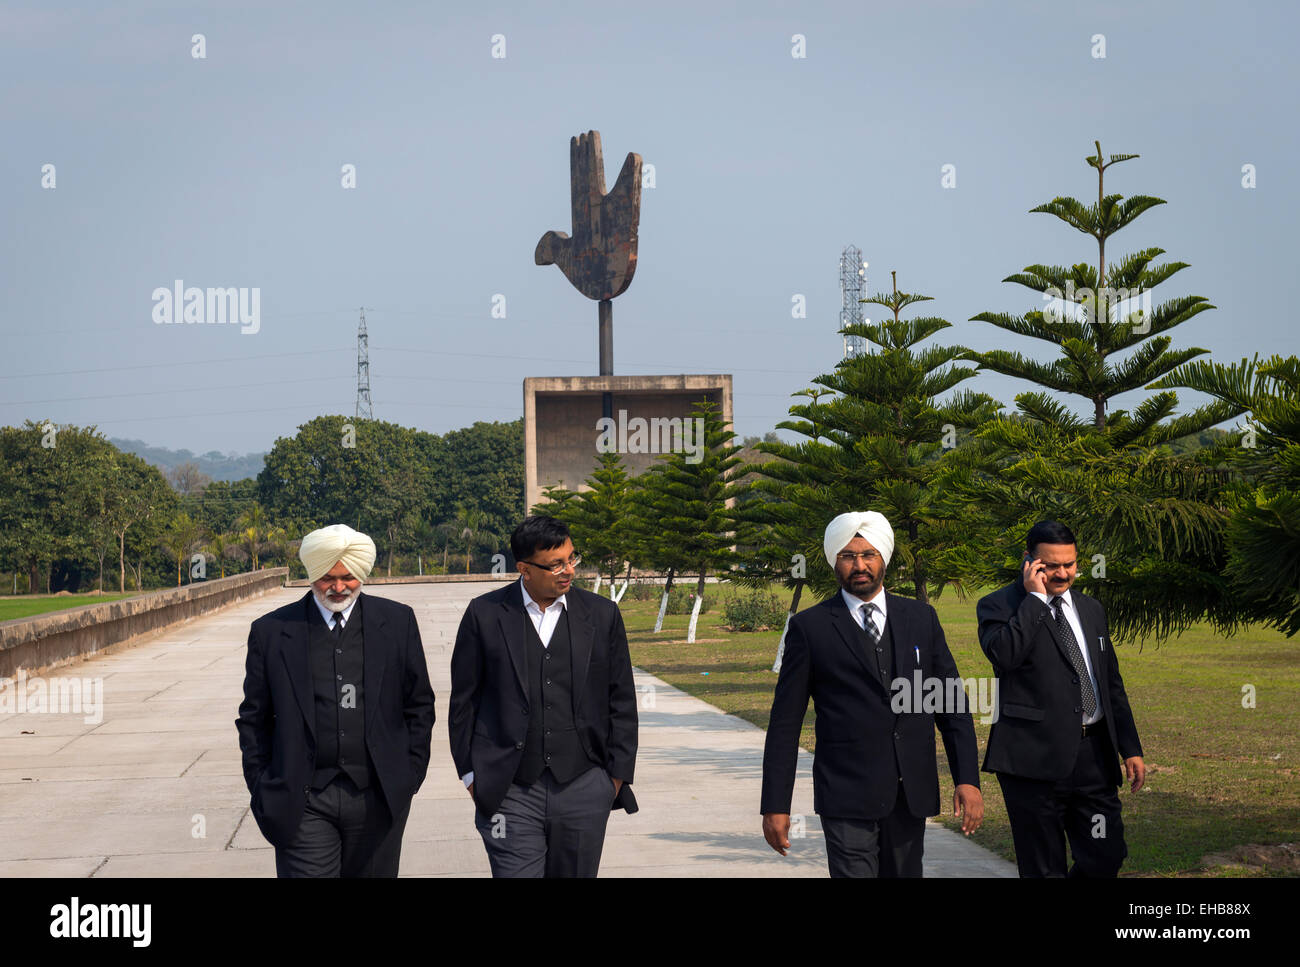 Indian barristers or lawyers near Le Corbusier's open hand symbol near the High Court in Chandigarh, India. Stock Photo